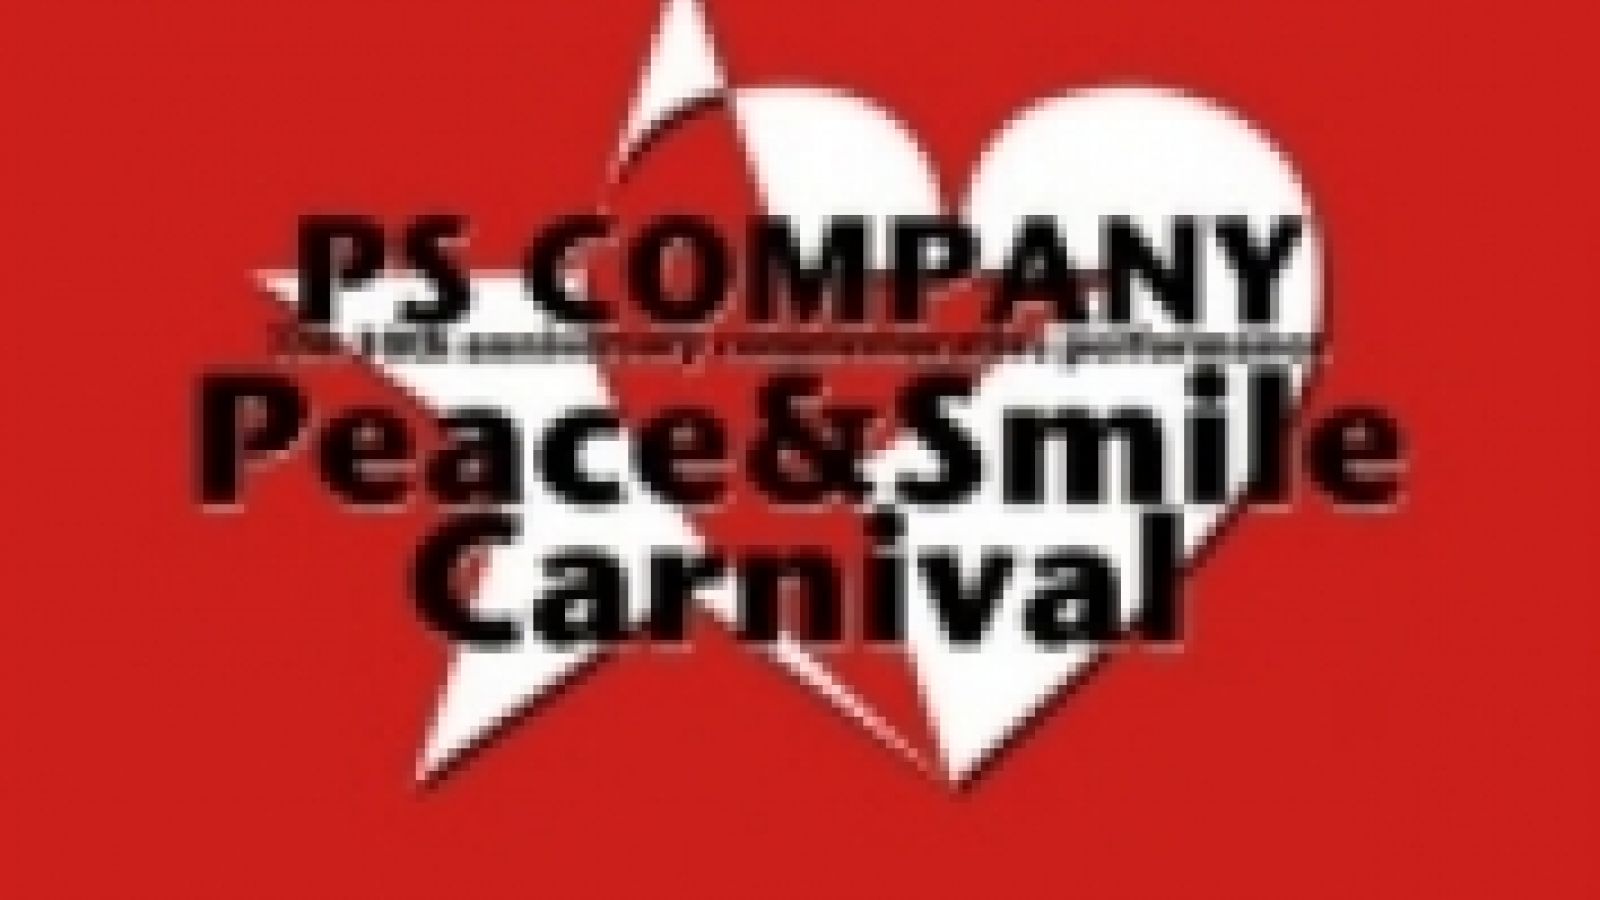 PS COMPANY [10th Anniversary Concert Peace & Smile Carnival] © 2009 Zy.connection Inc. All Rights Reserved.